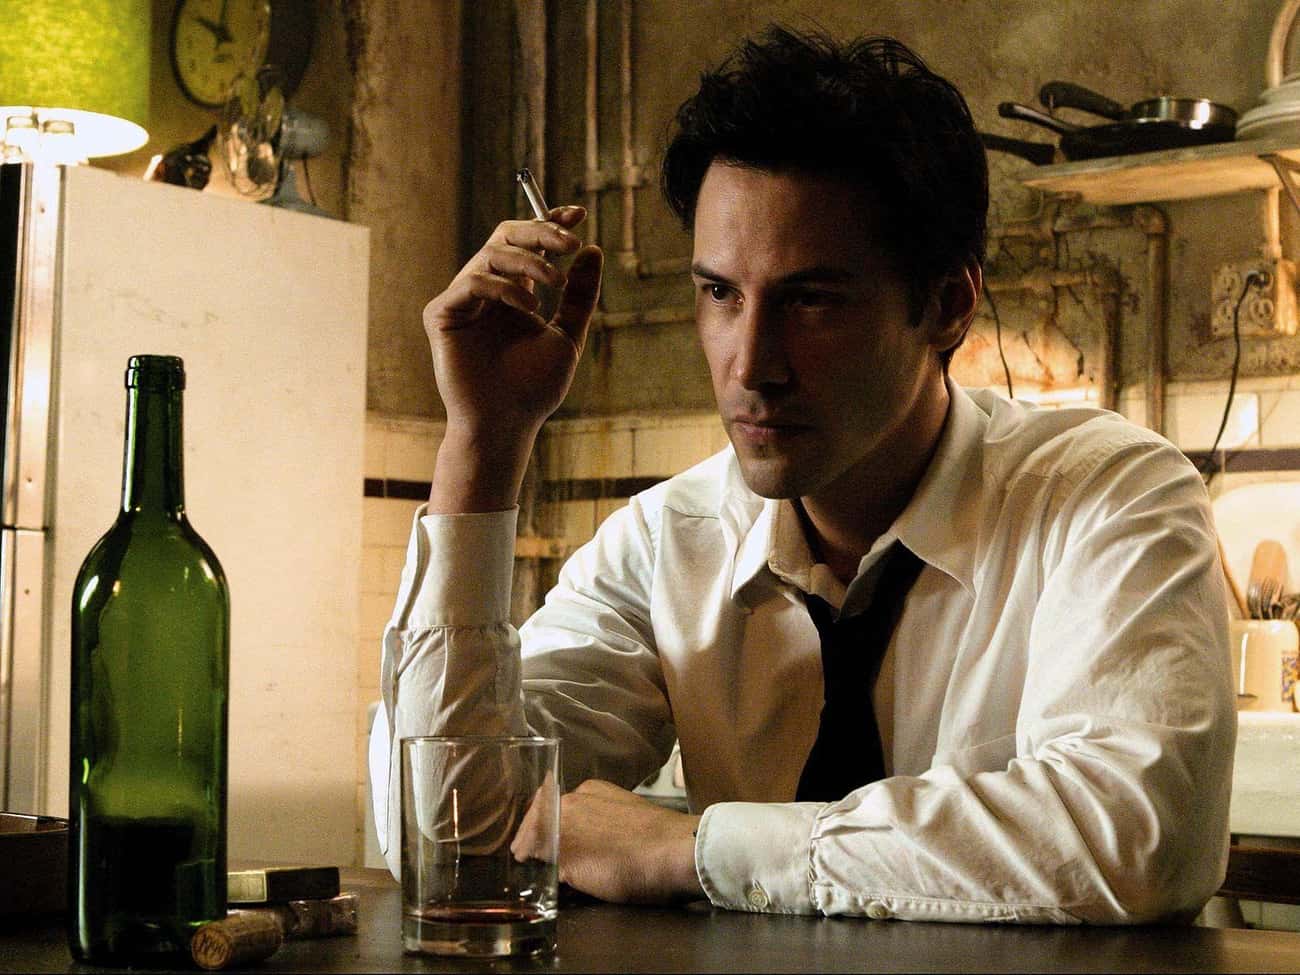 Screenwriter Frank Cappello Wanted A Personal Conflict For Constantine Rather Than A Save-The-World Narrative